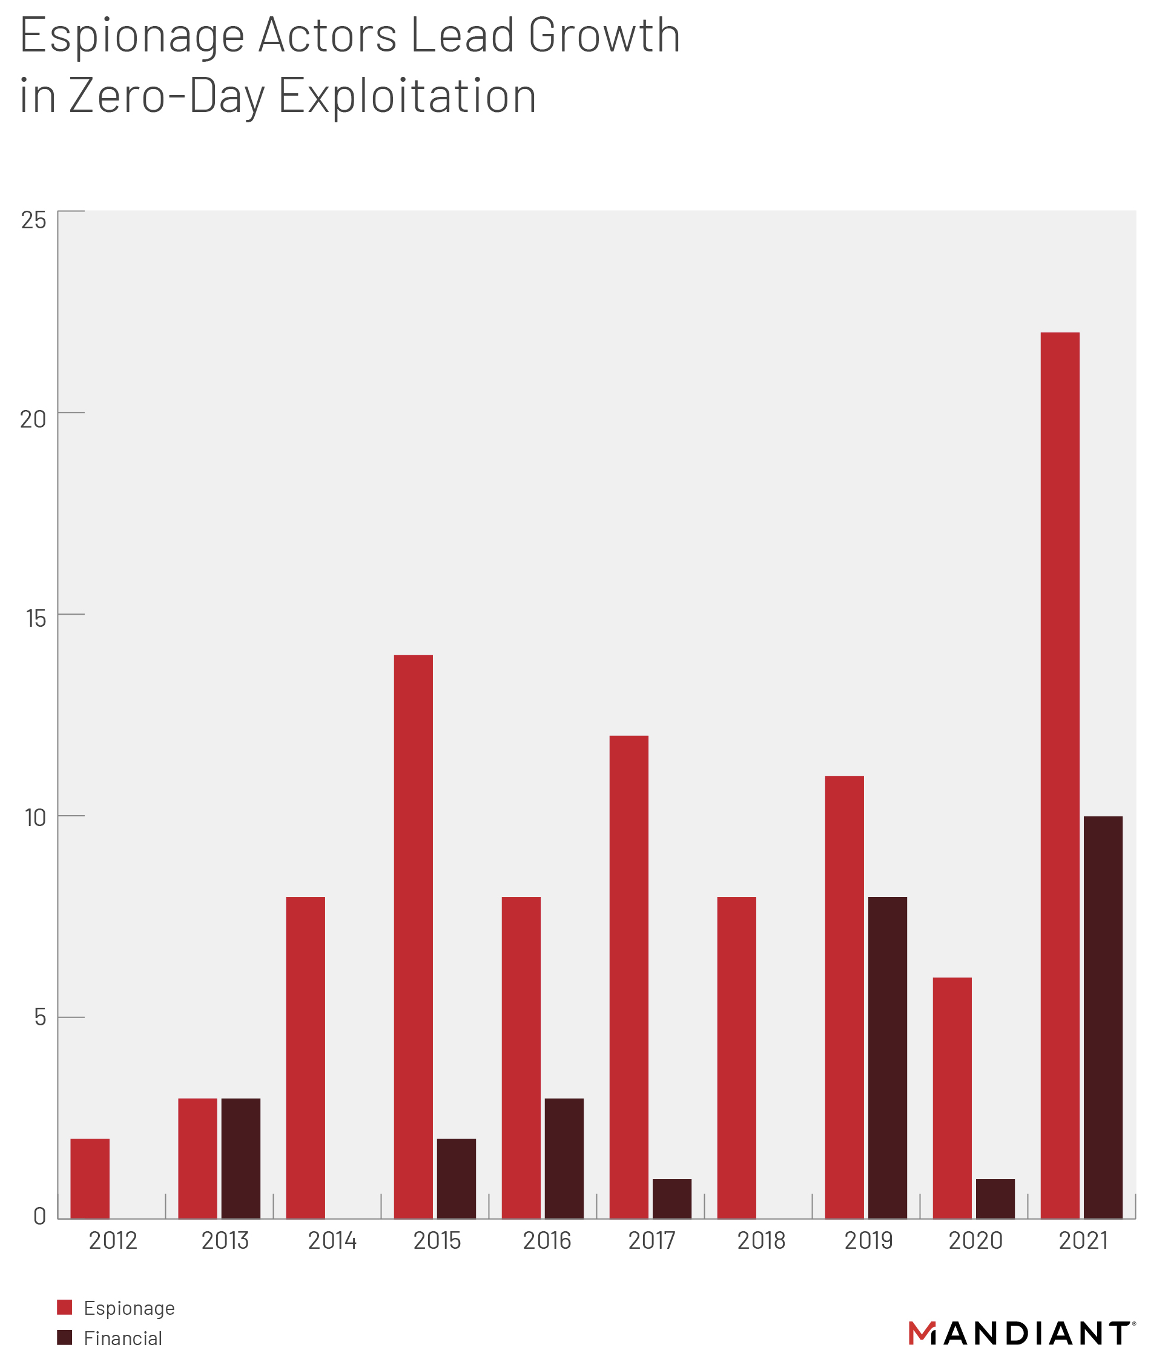 Proportion of identified zero-days exploited by motivations from 2012-02021